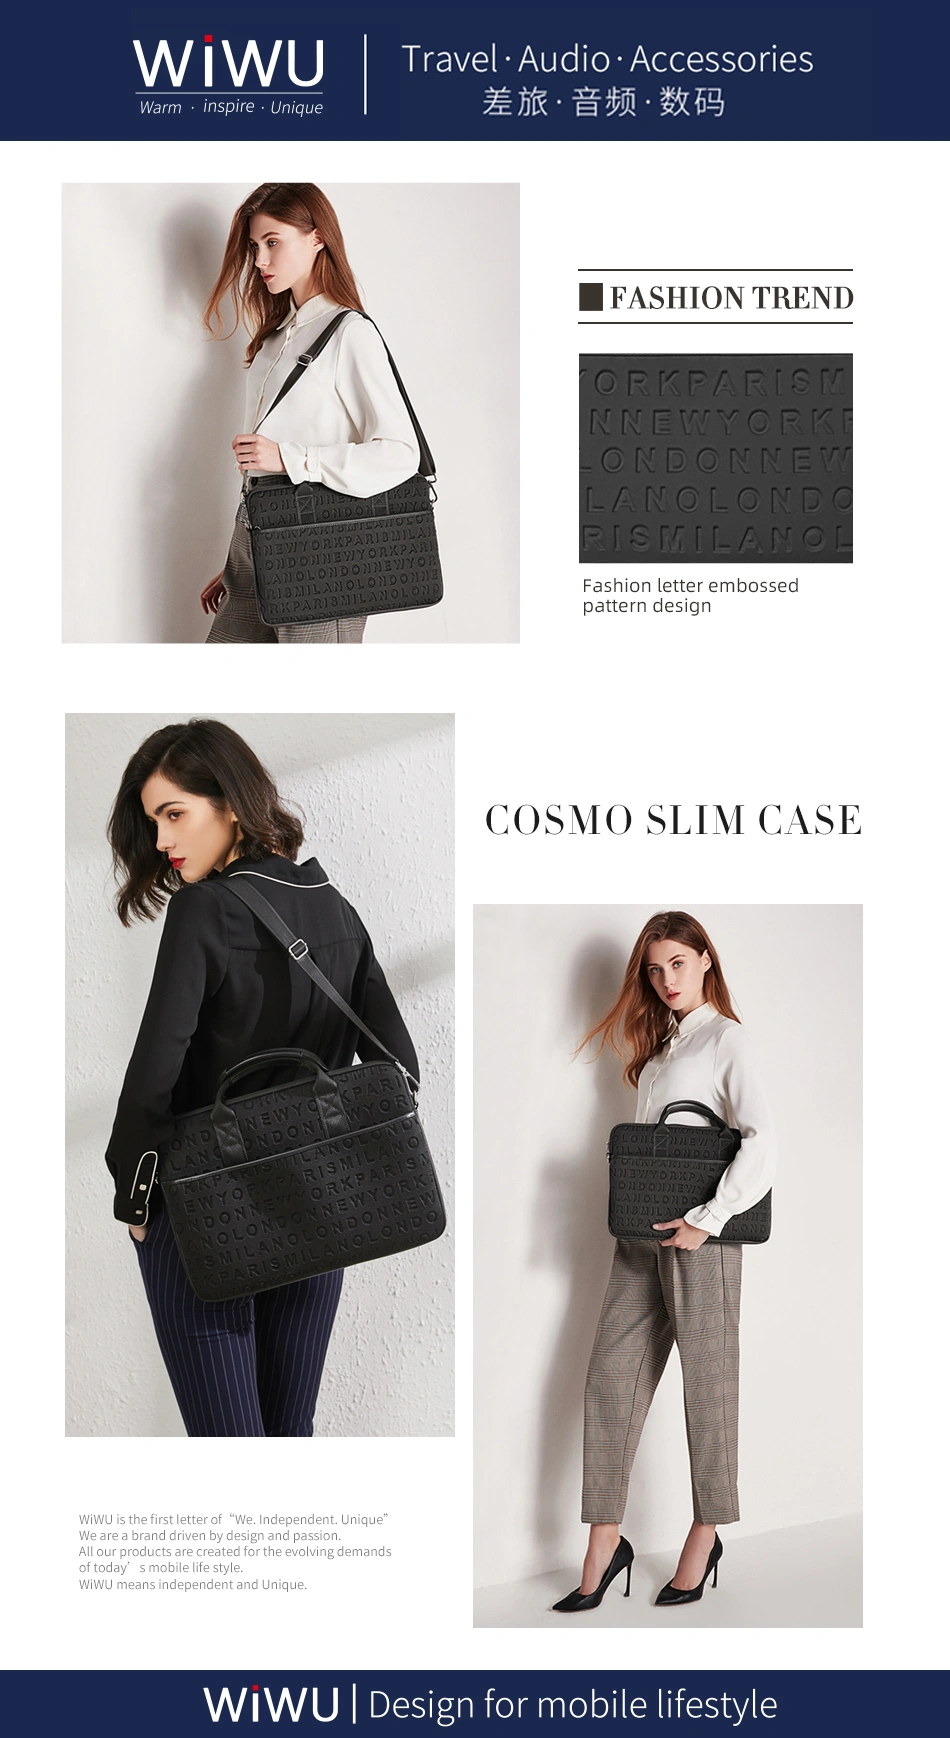 WIWU 15.4 GM3910 VOGUE/COSMO SLIM CASE FOR LAPTOP/ULTRABOOK (WITH STRAP), Laptop Bag, Carry Bag, Macbook Bag